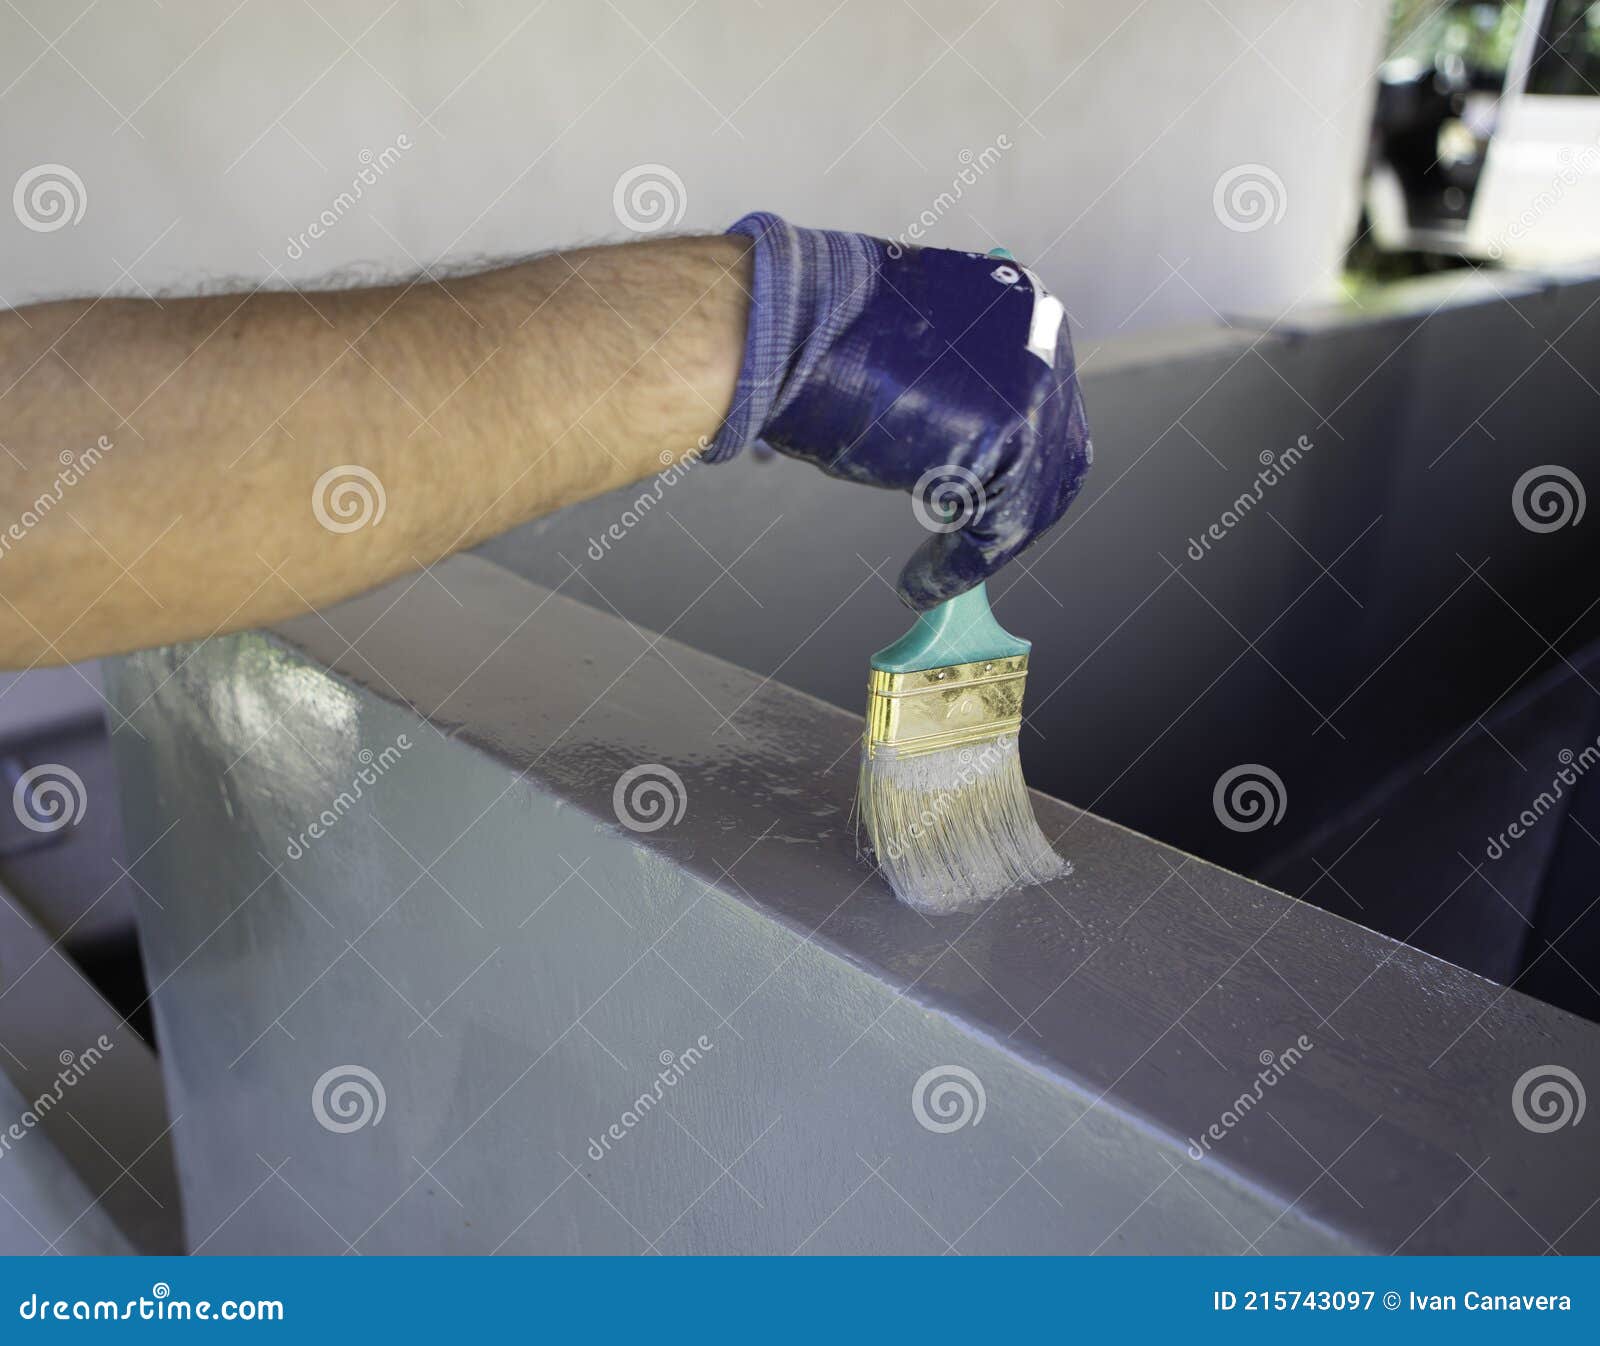 worker applies waterproofing with a small brush